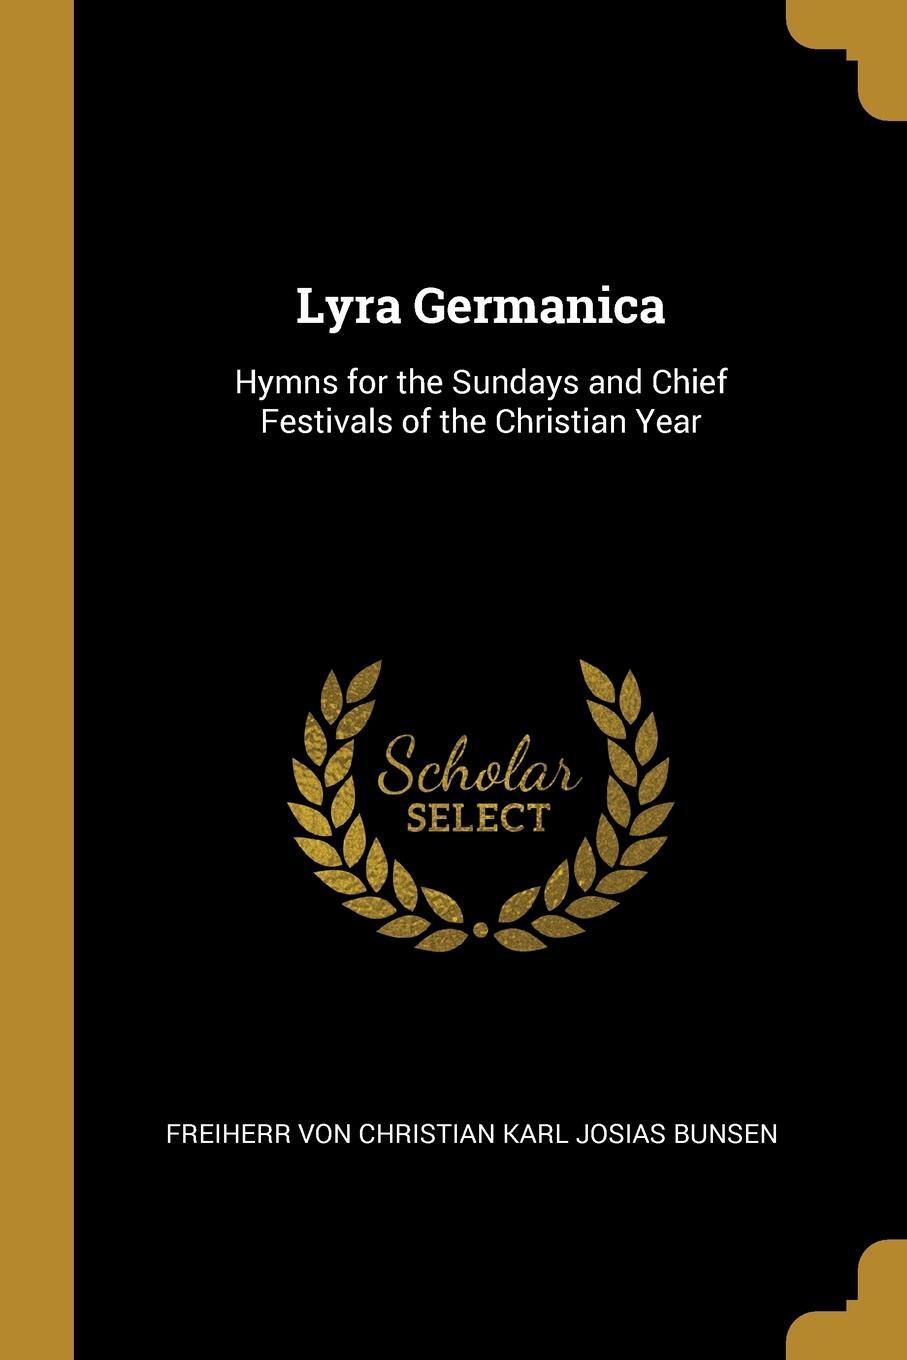 фото Lyra Germanica. Hymns for the Sundays and Chief Festivals of the Christian Year